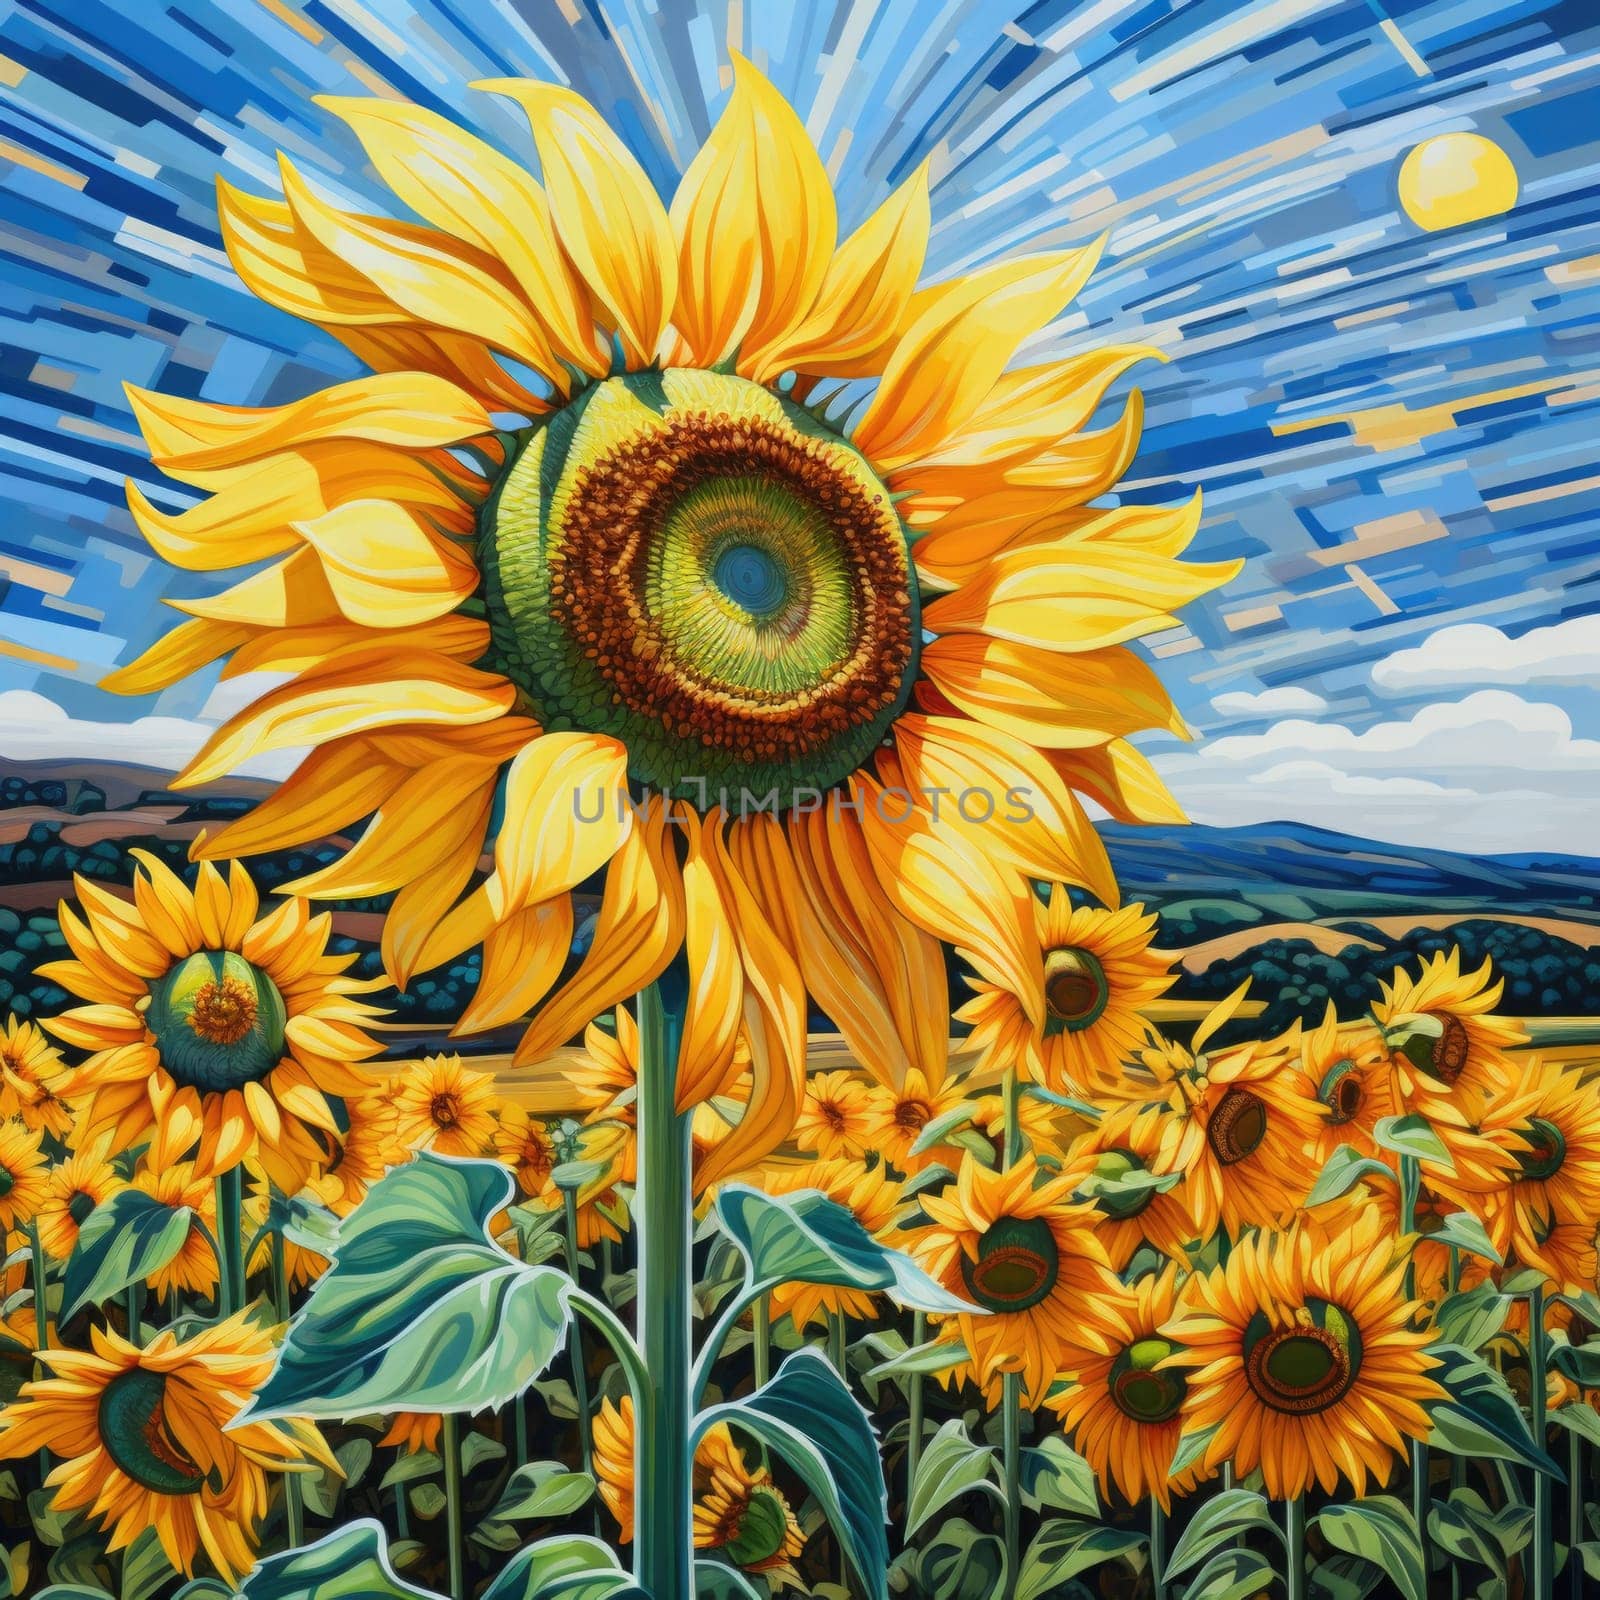 A realistic painting capturing the essence of a sunflower in a vibrant field of sunflowers.